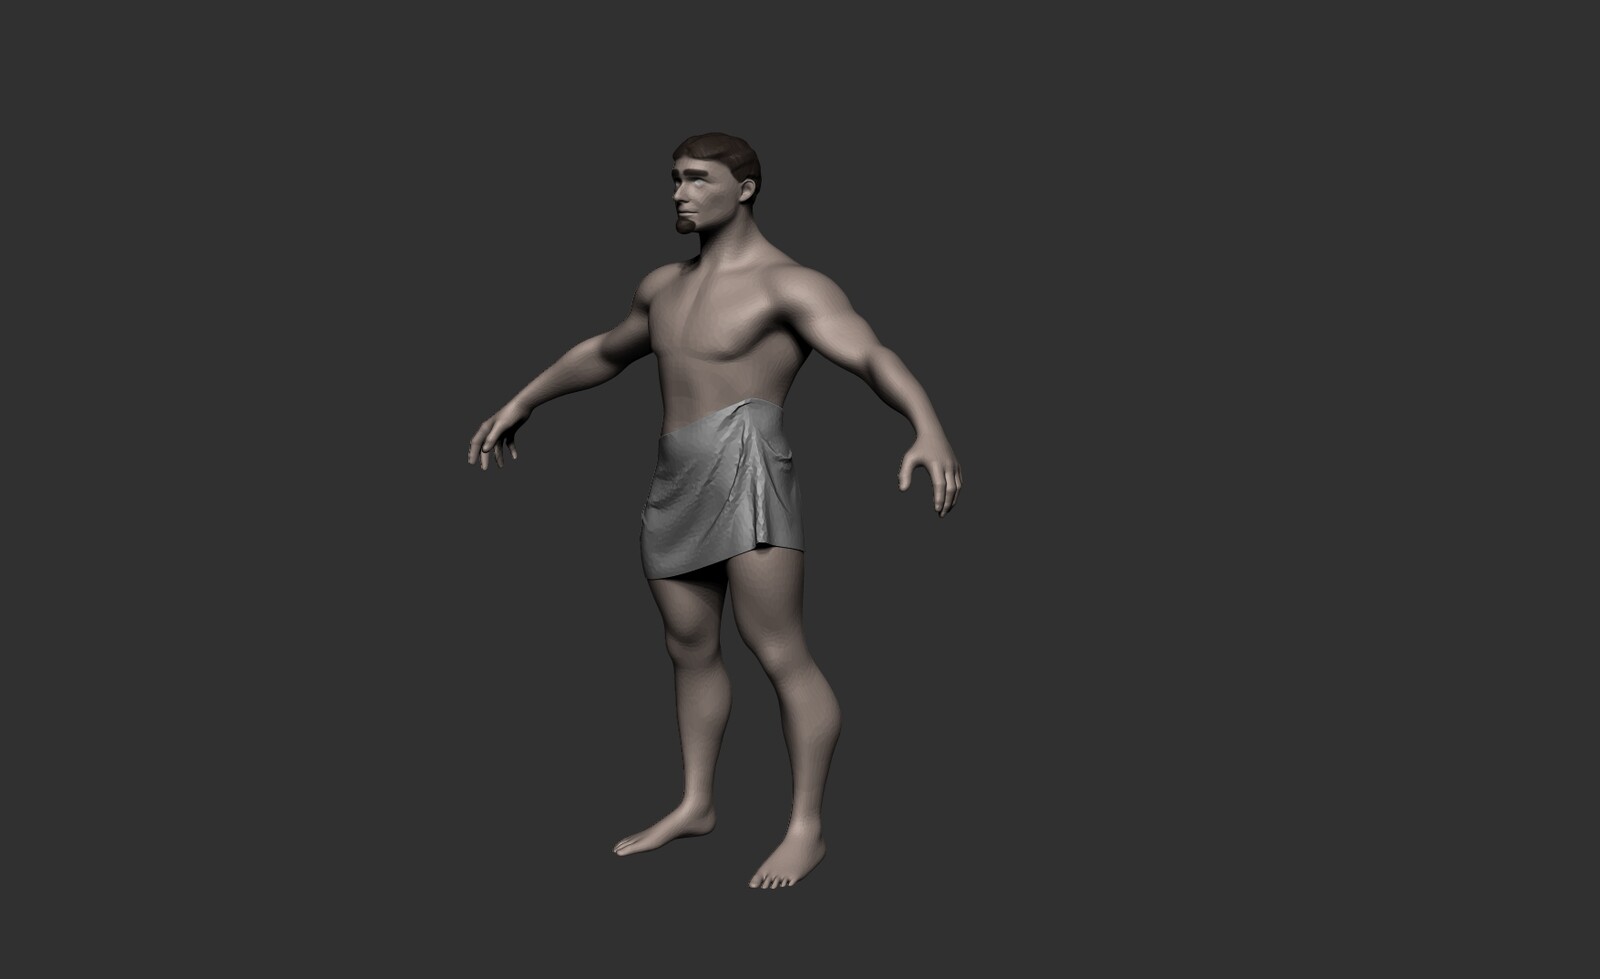 Low poly transformed sort of naked model made in Zbrush and Marvelous Designer.